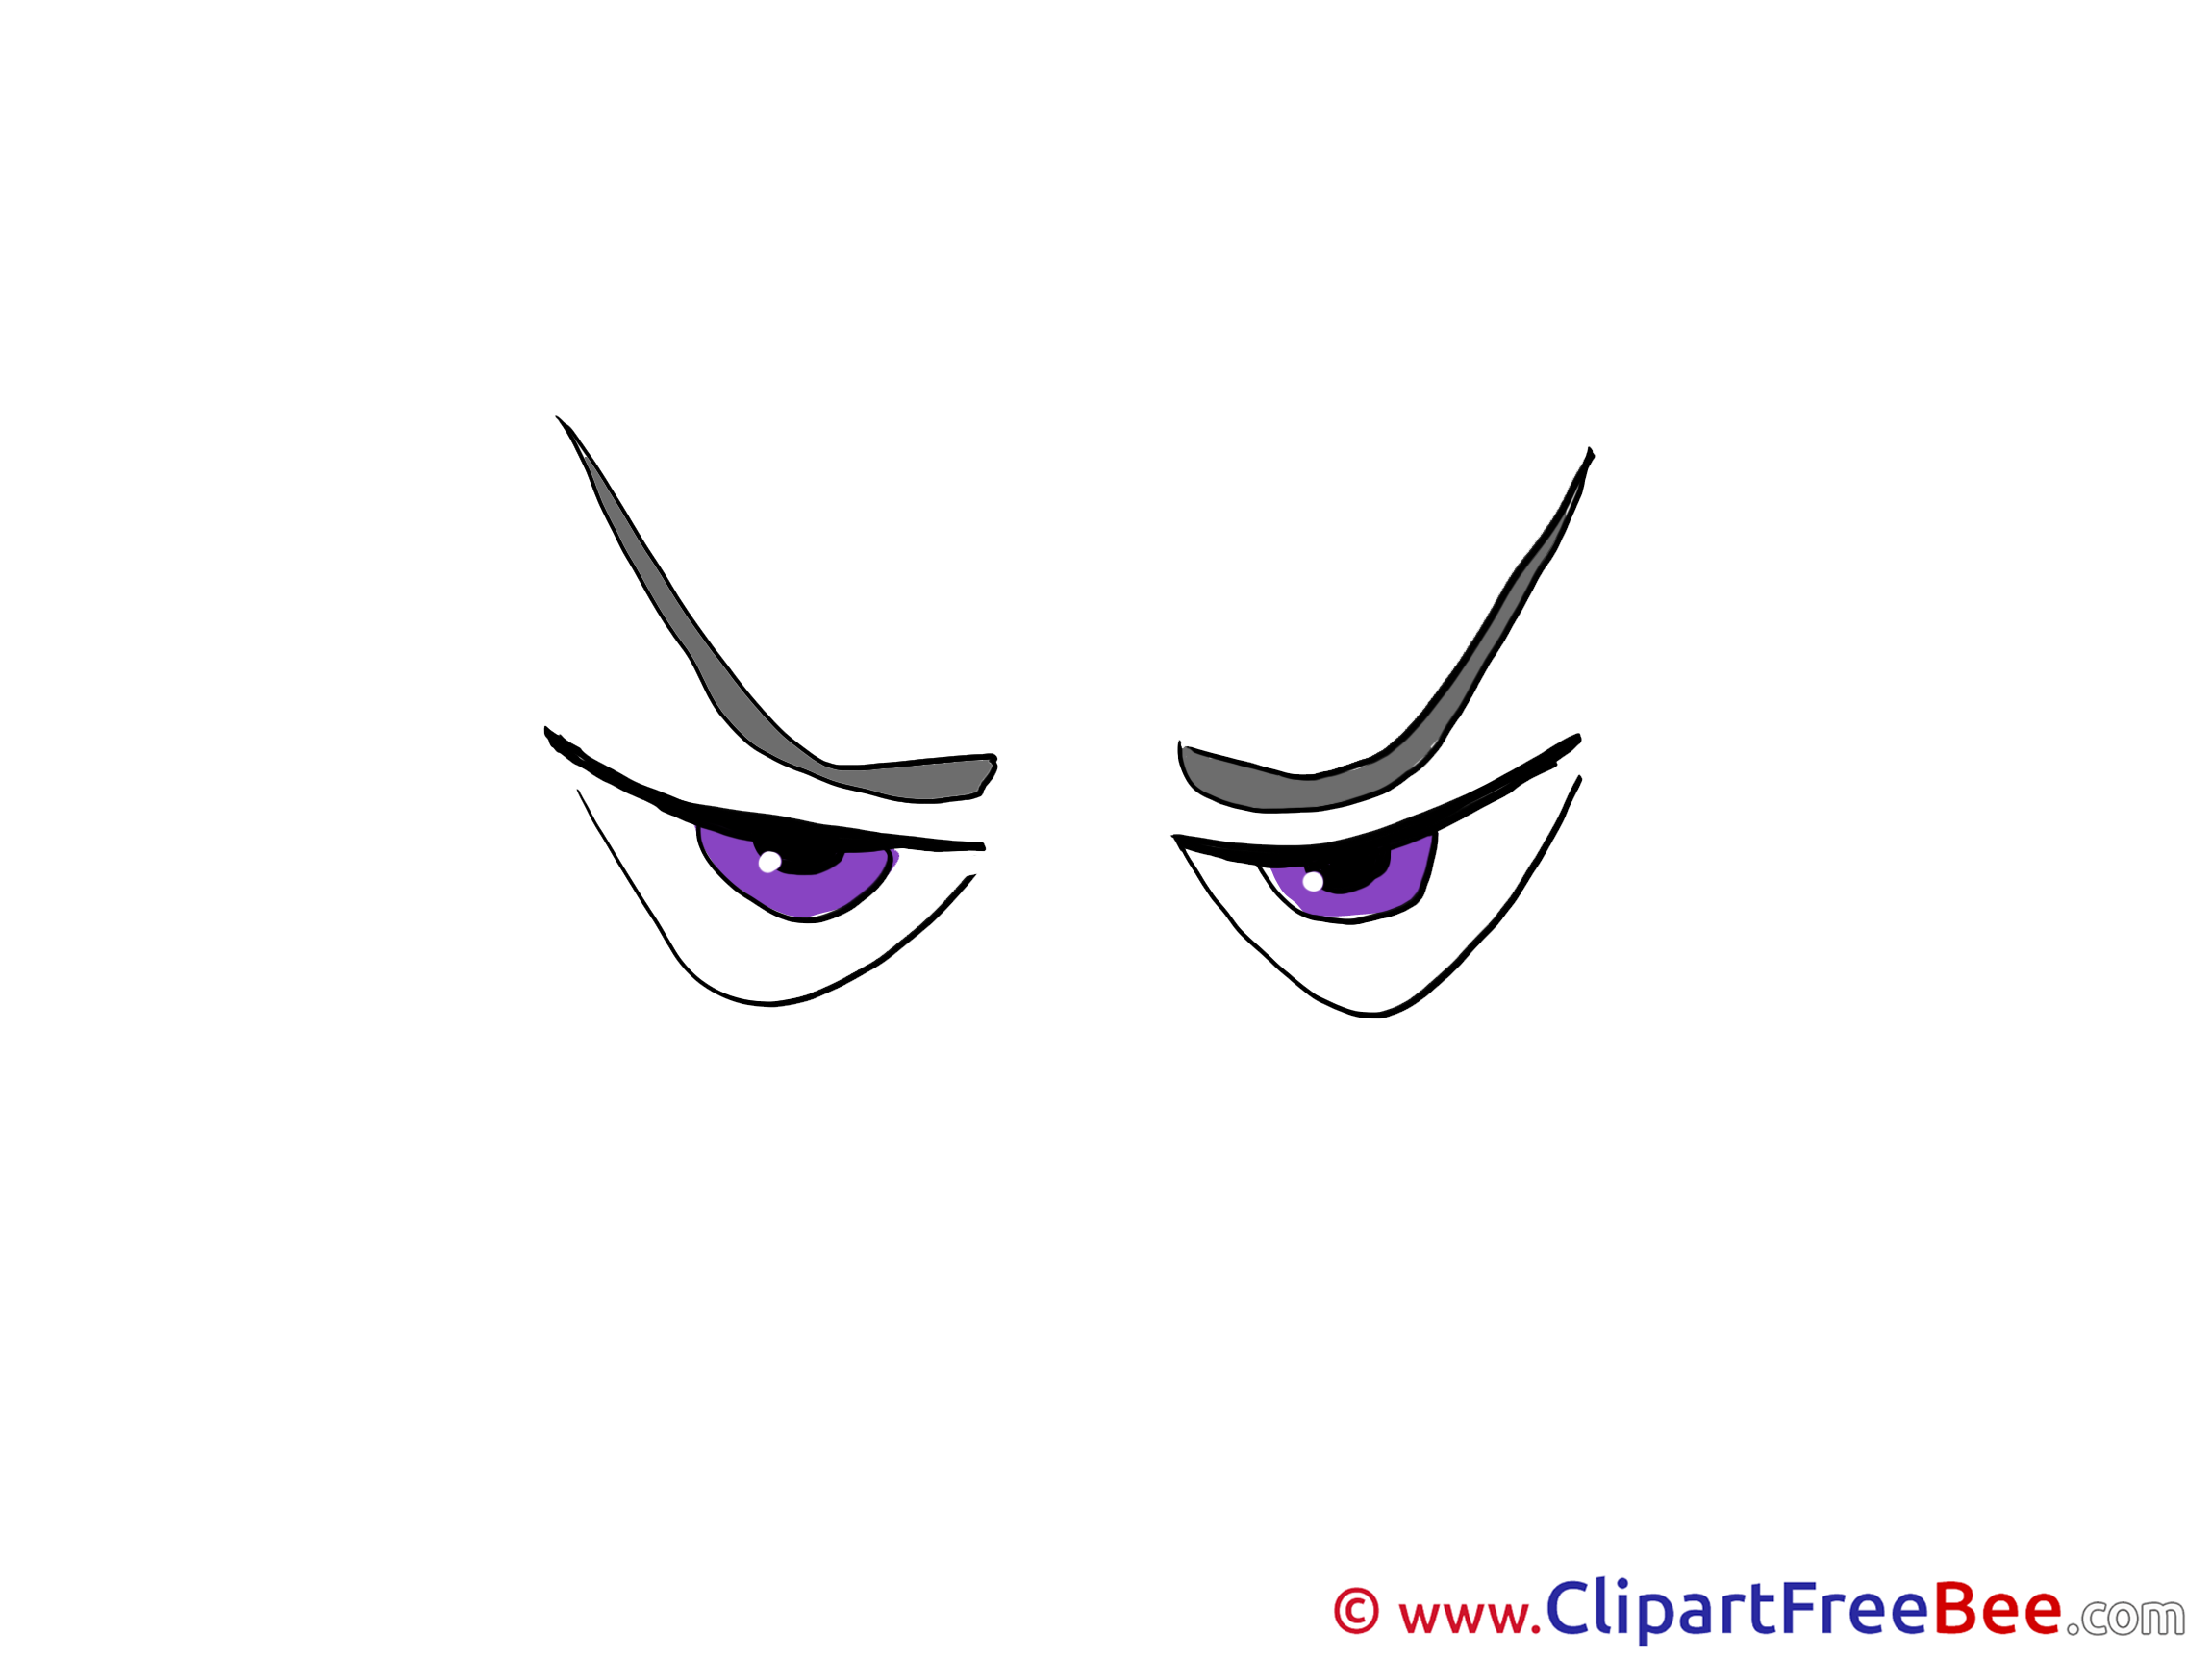 Sly Look Clipart free Image download